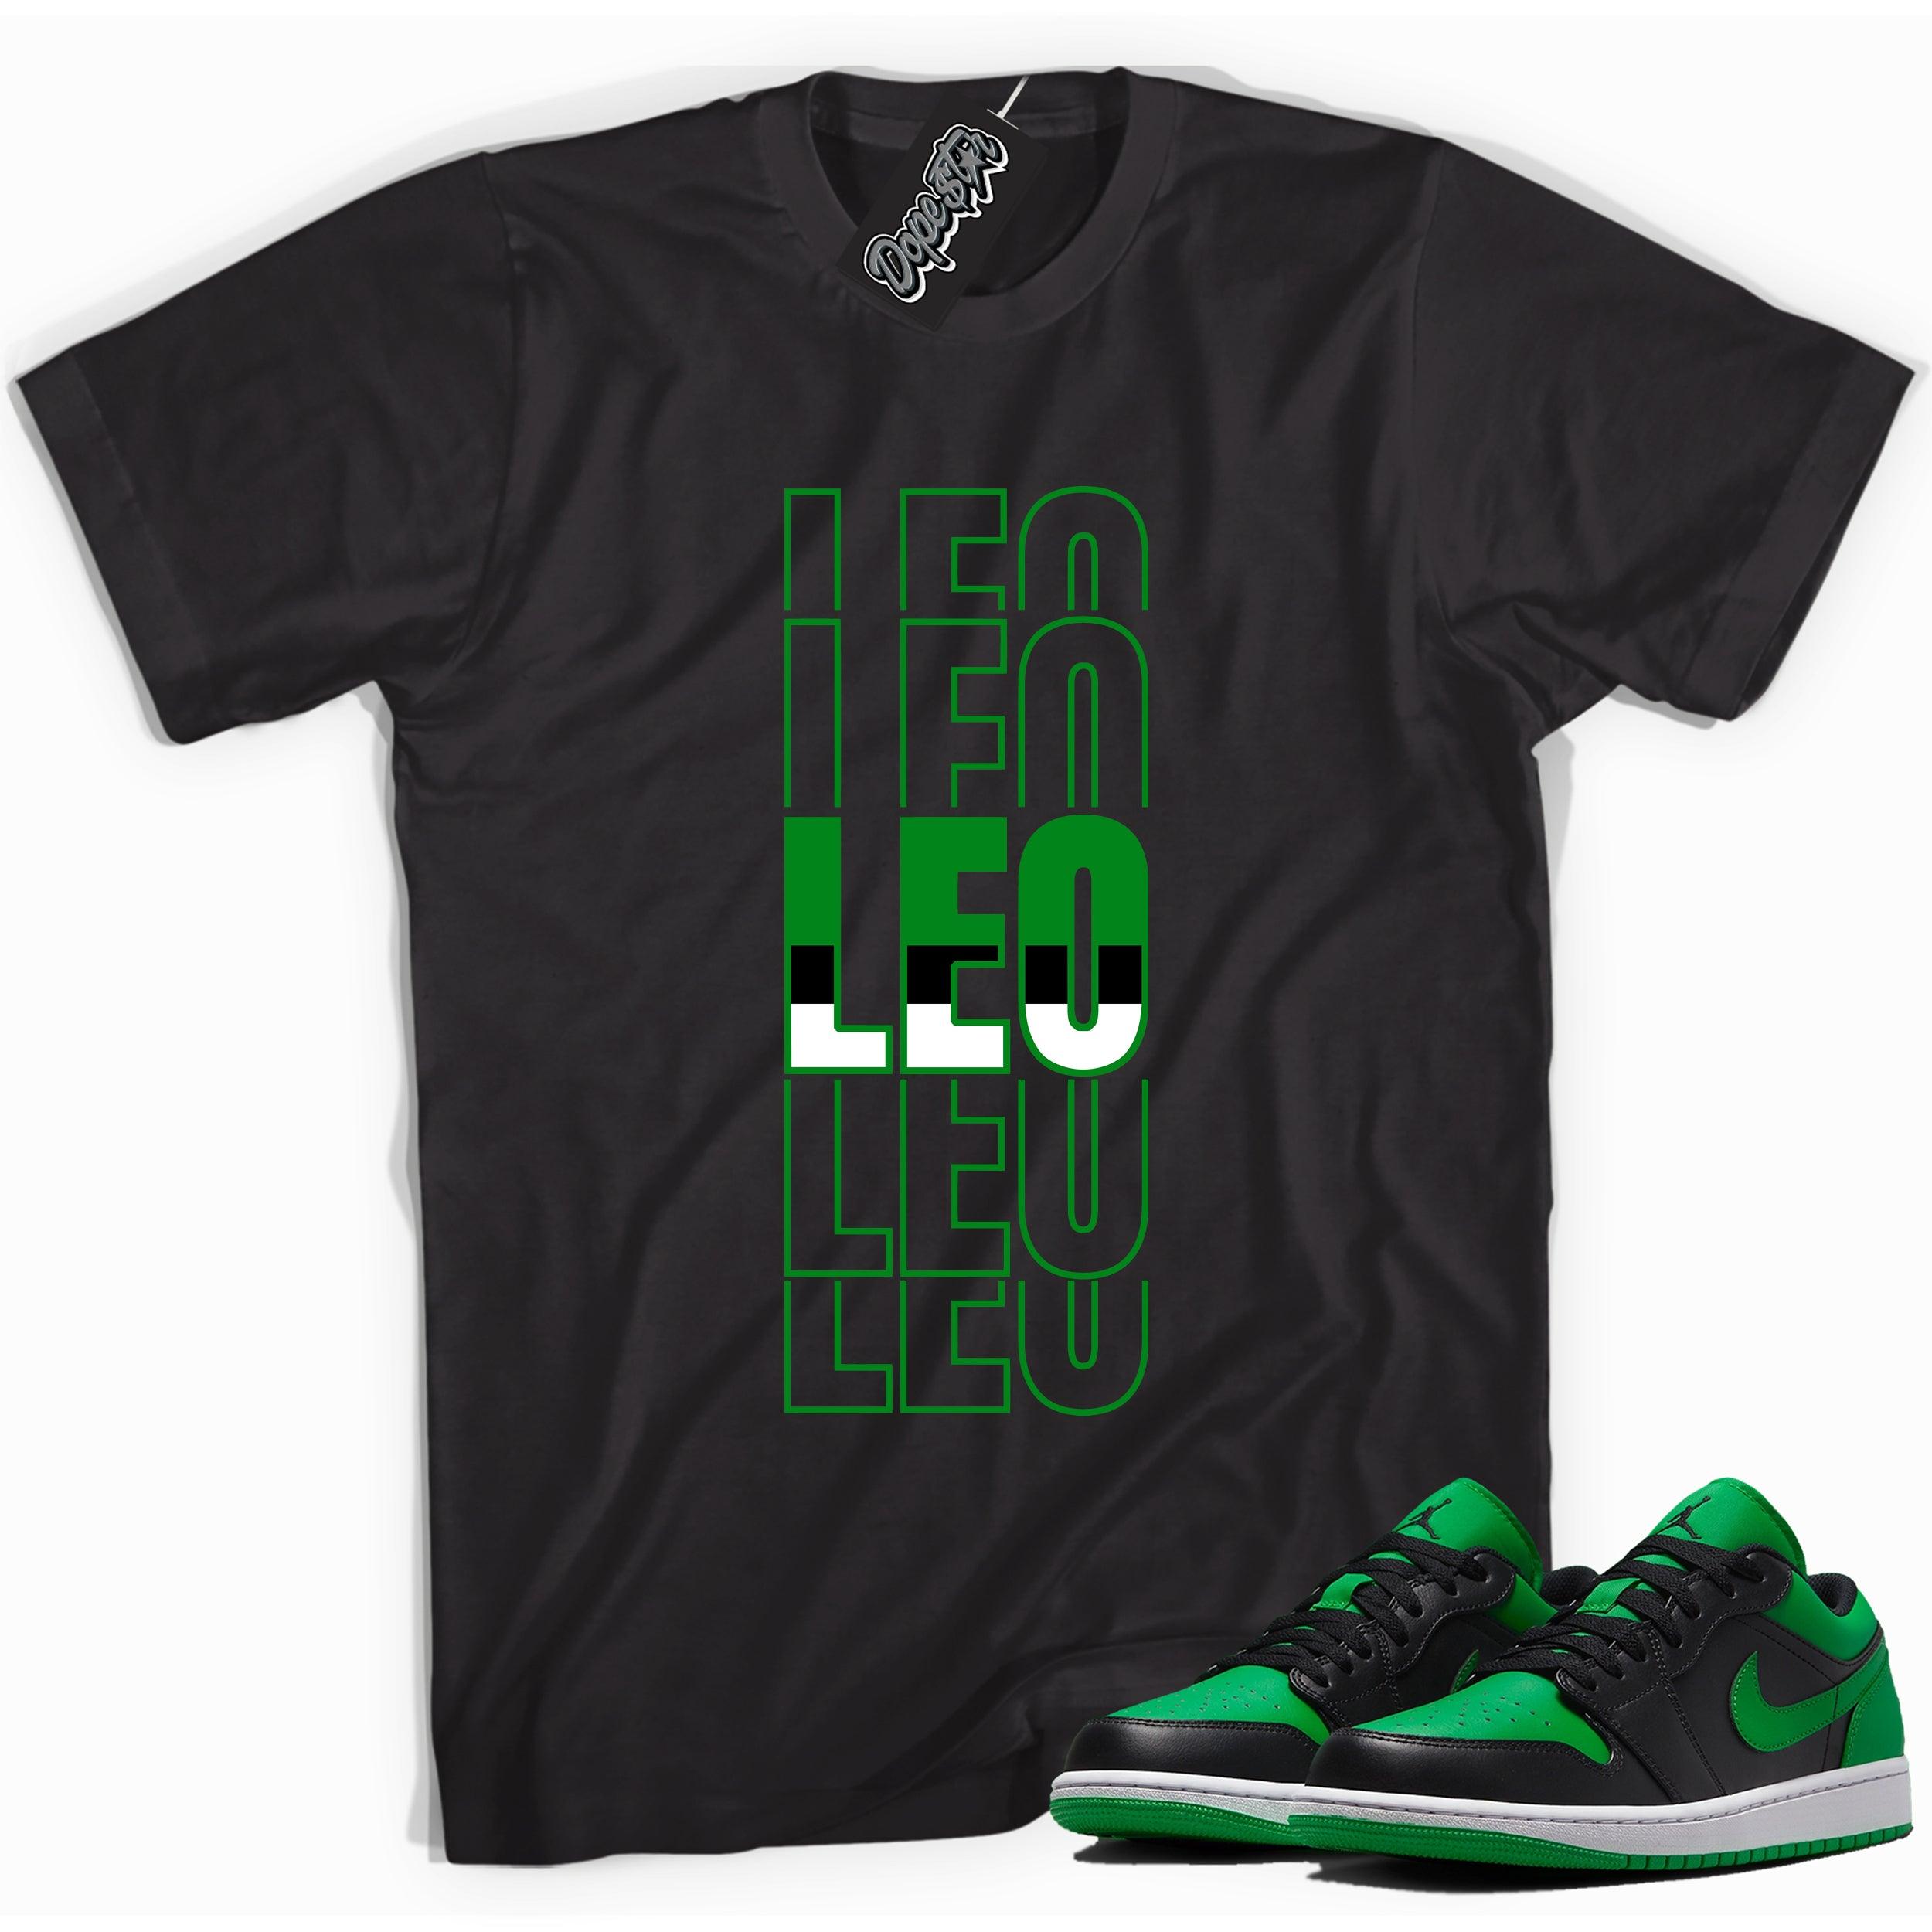 Cool black graphic tee with 'Leo' print, that perfectly matches Air Jordan 1 Low Lucky Green sneakers